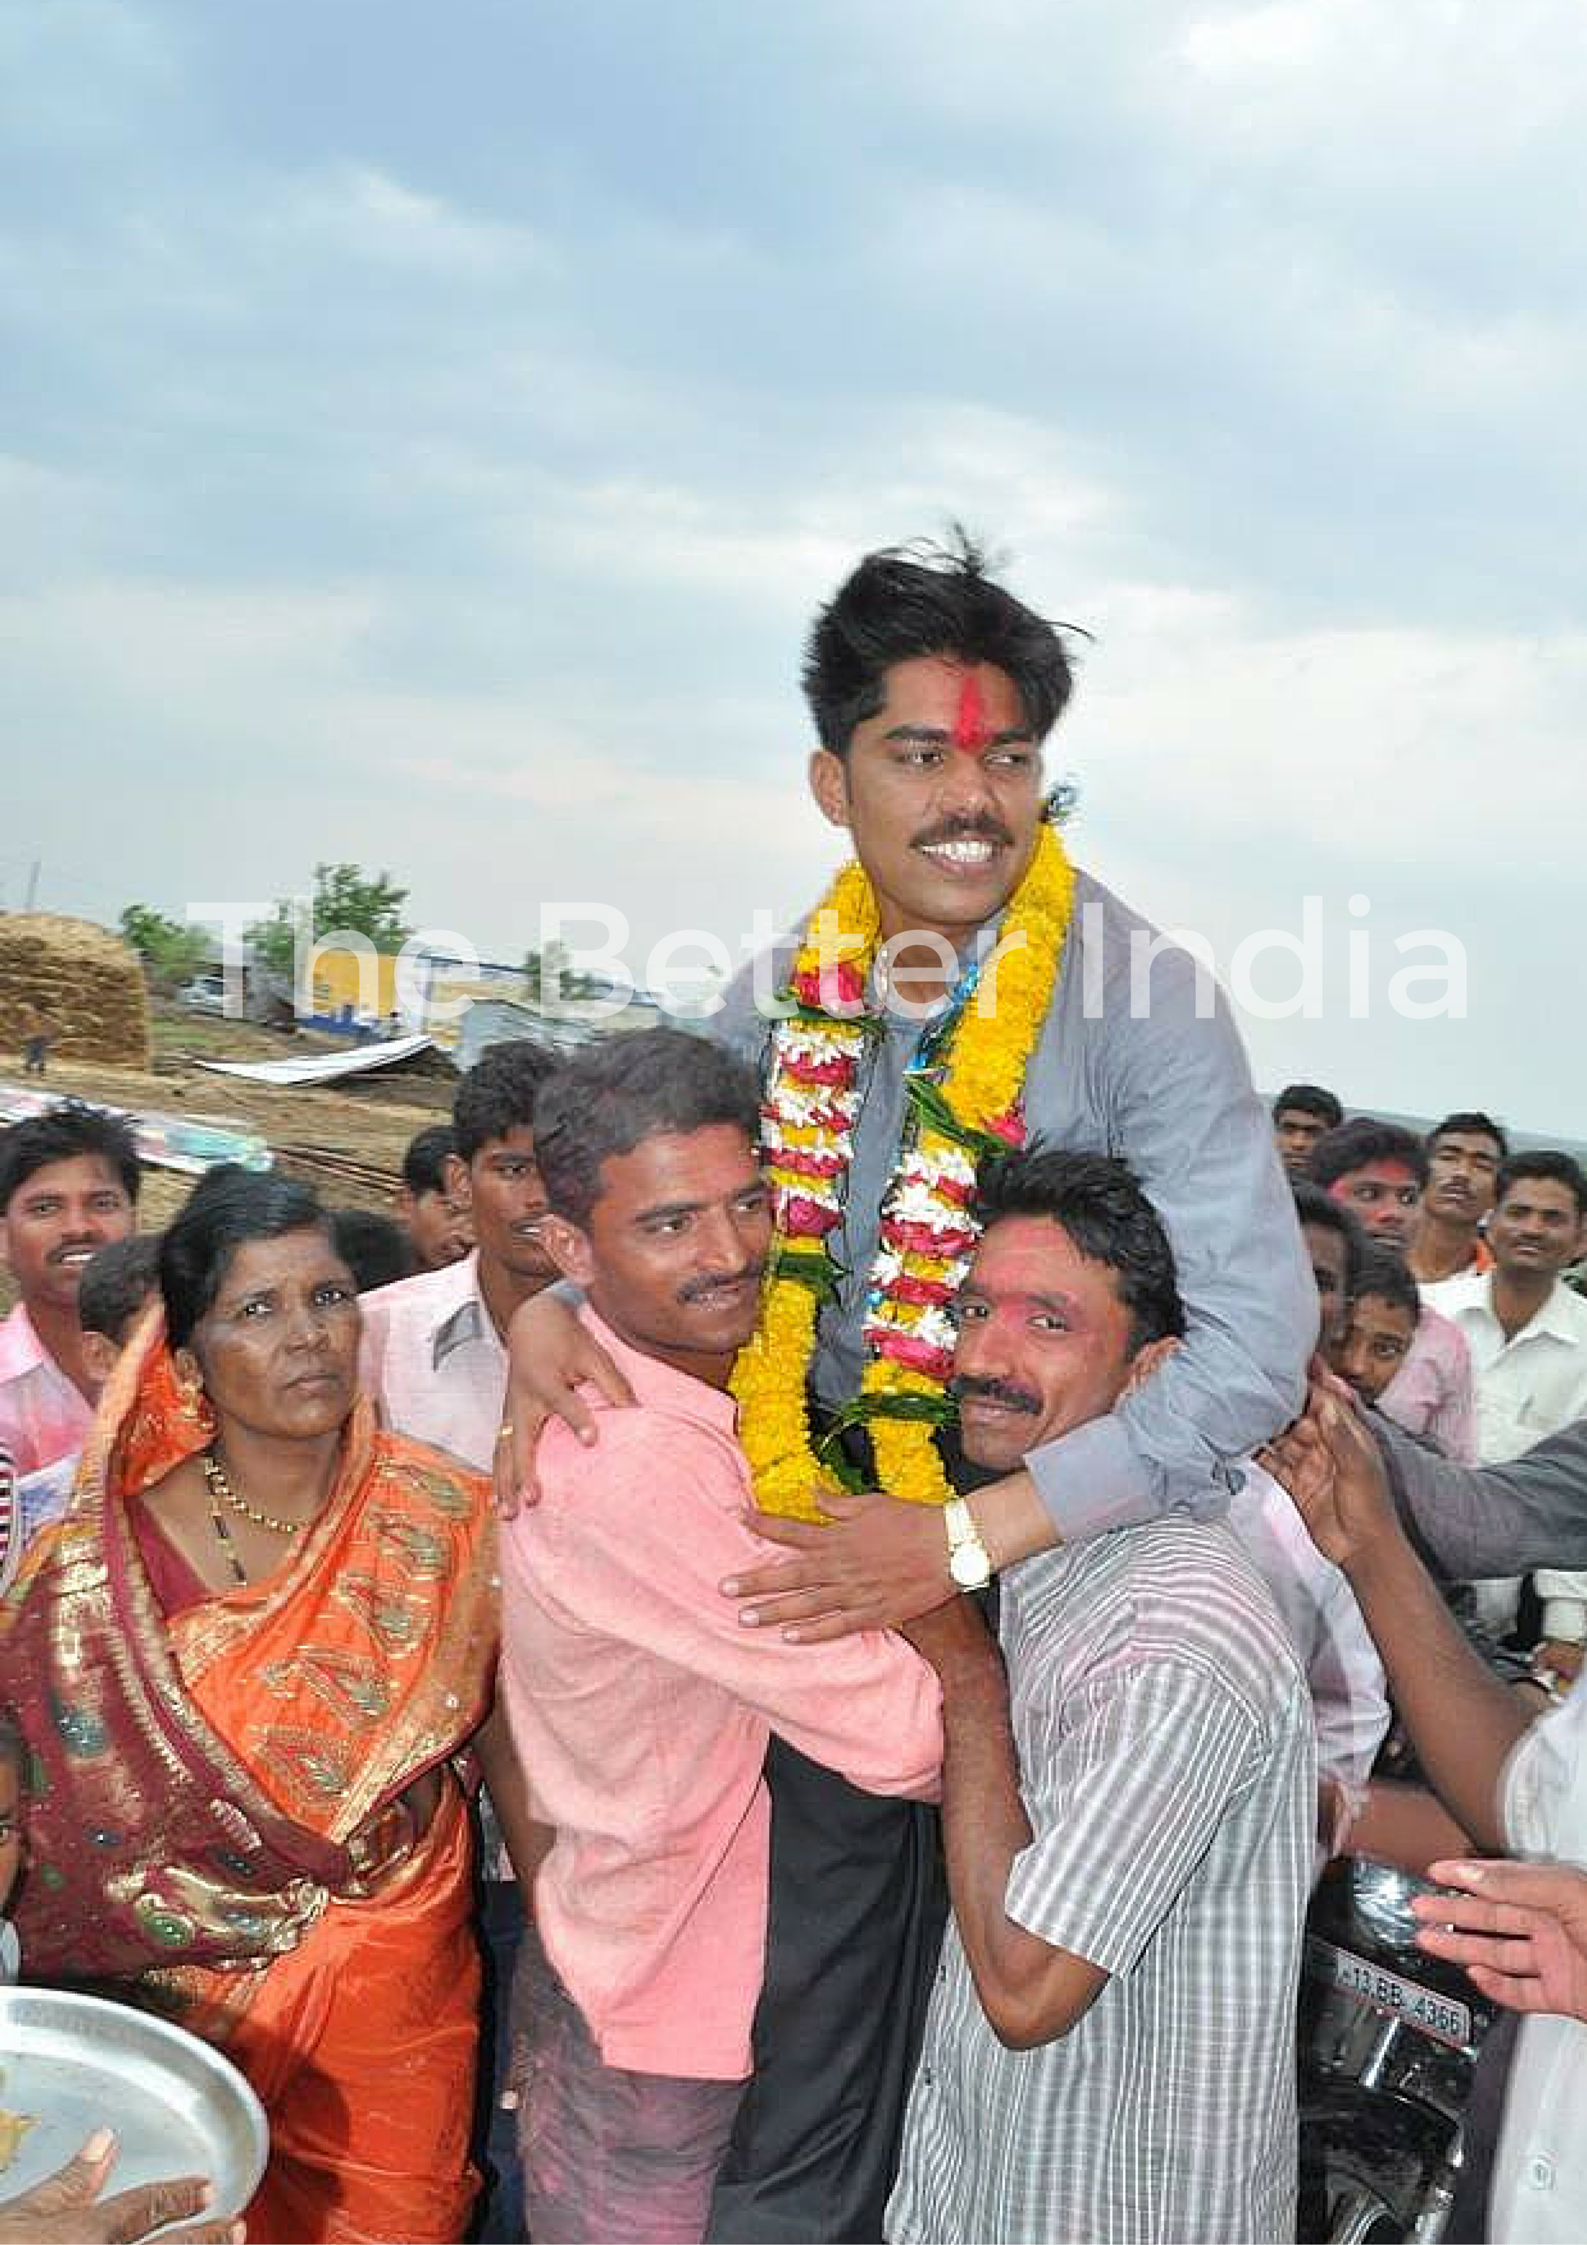 Celebrations In Ramesh's Village When He Came Back - Ramesh Gholap Ias Officer , HD Wallpaper & Backgrounds